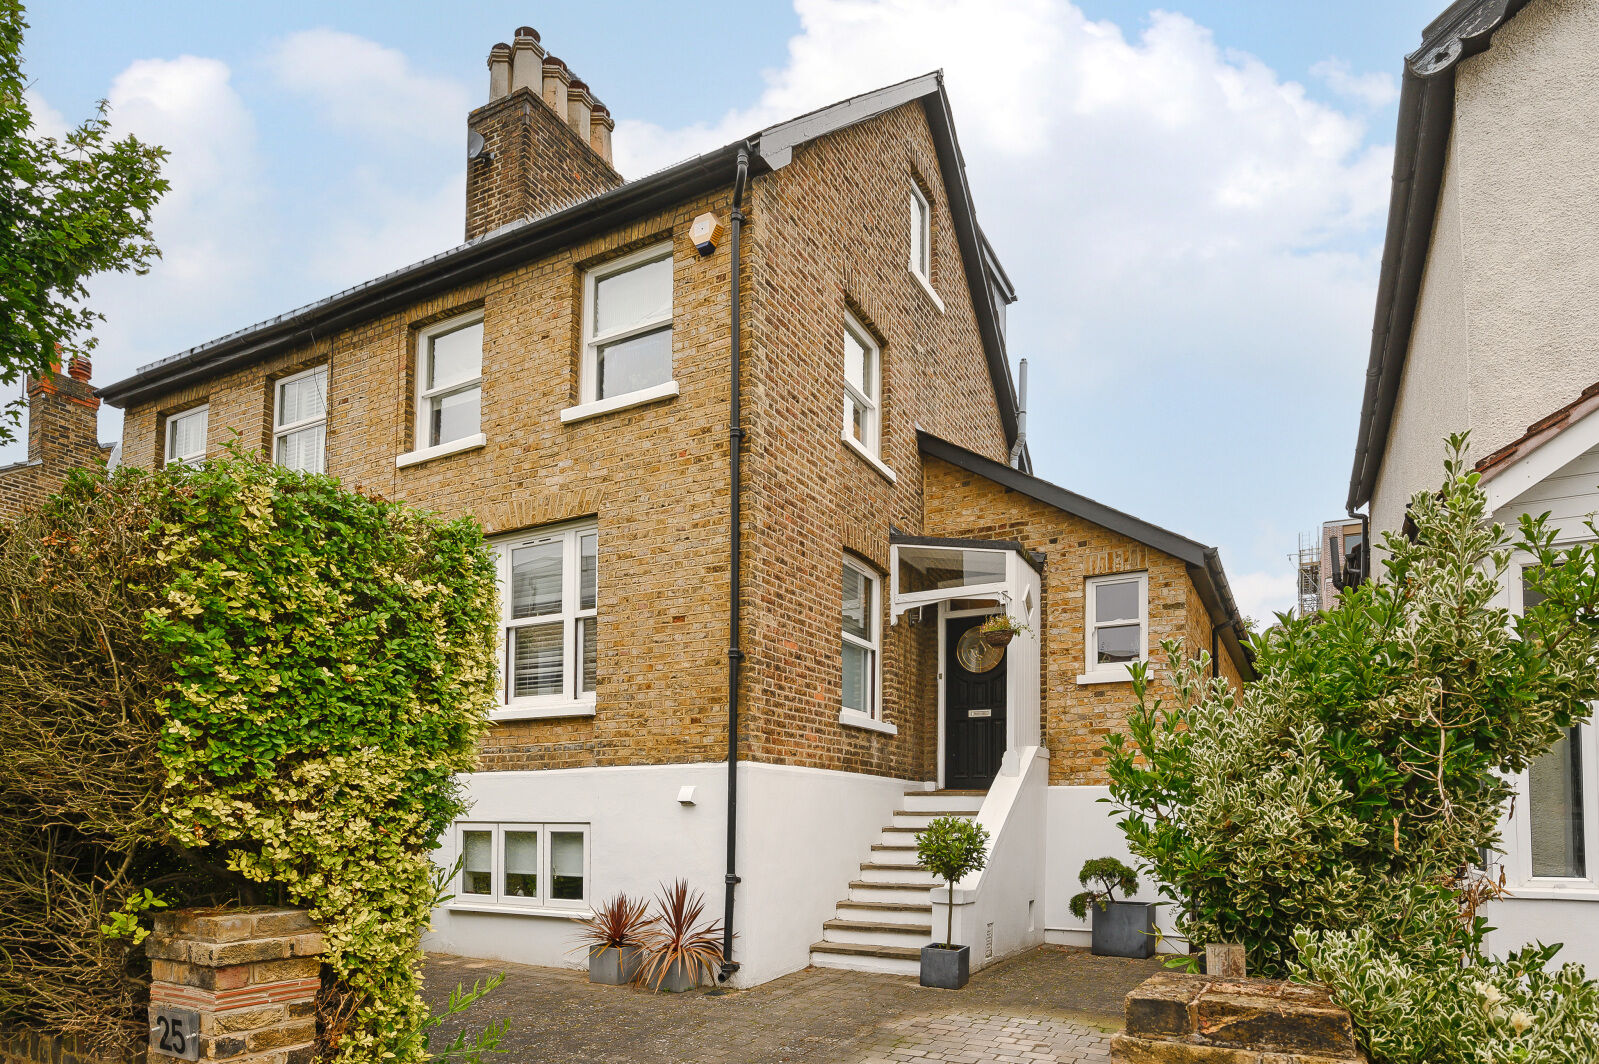 4 bedroom semi detached house for sale Griffiths Road, Wimbledon, SW19, main image